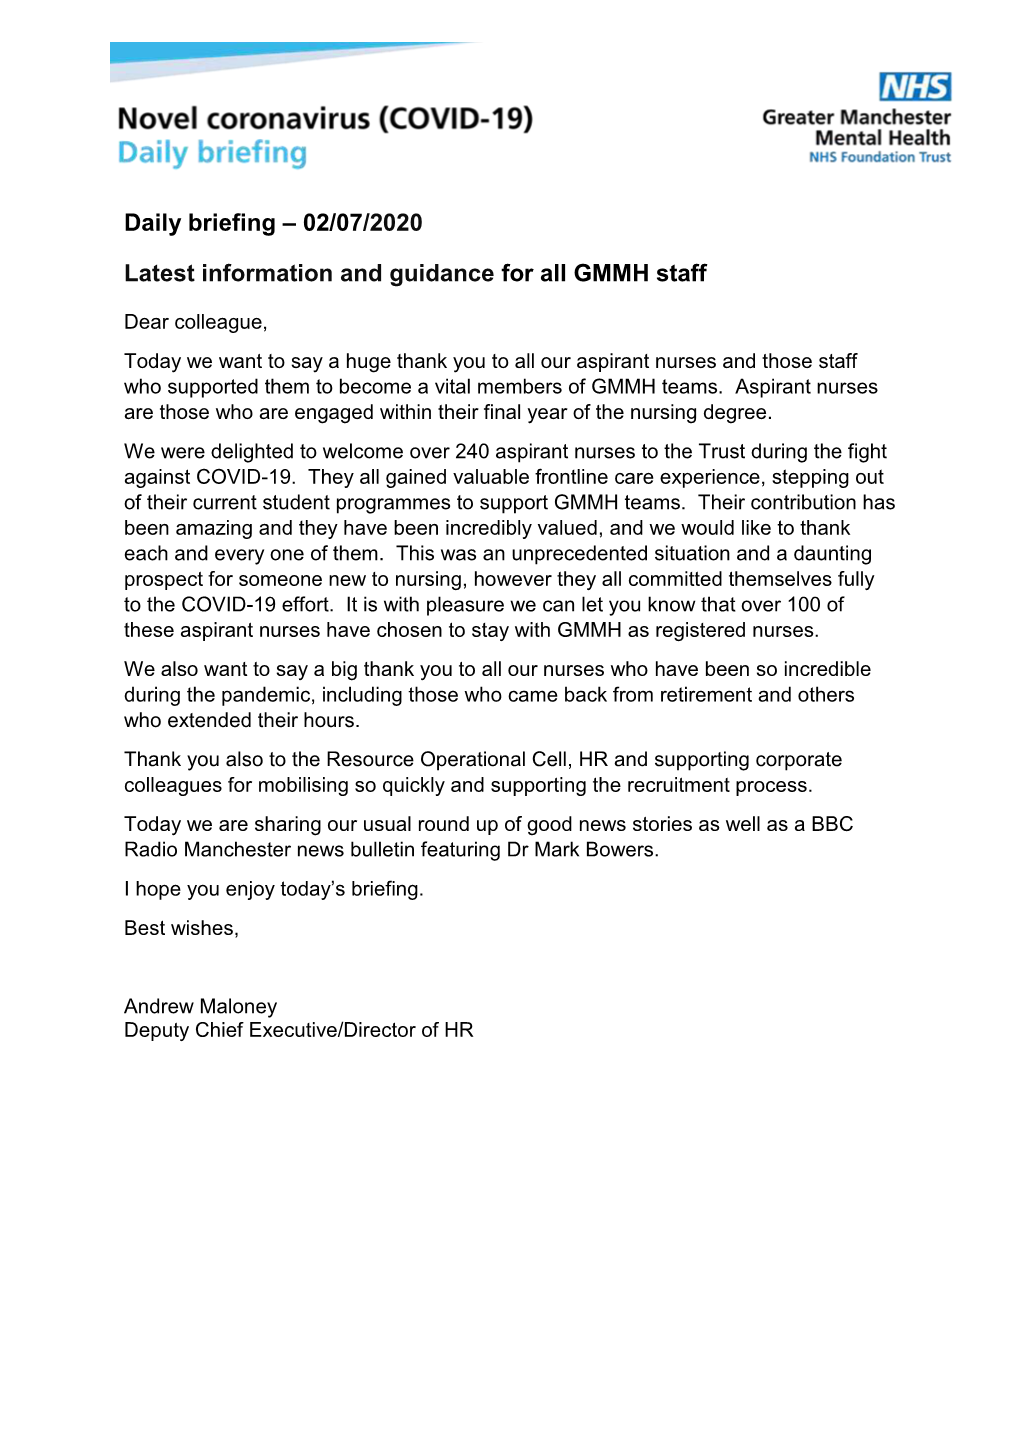 02/07/2020 Latest Information and Guidance for All GMMH Staff